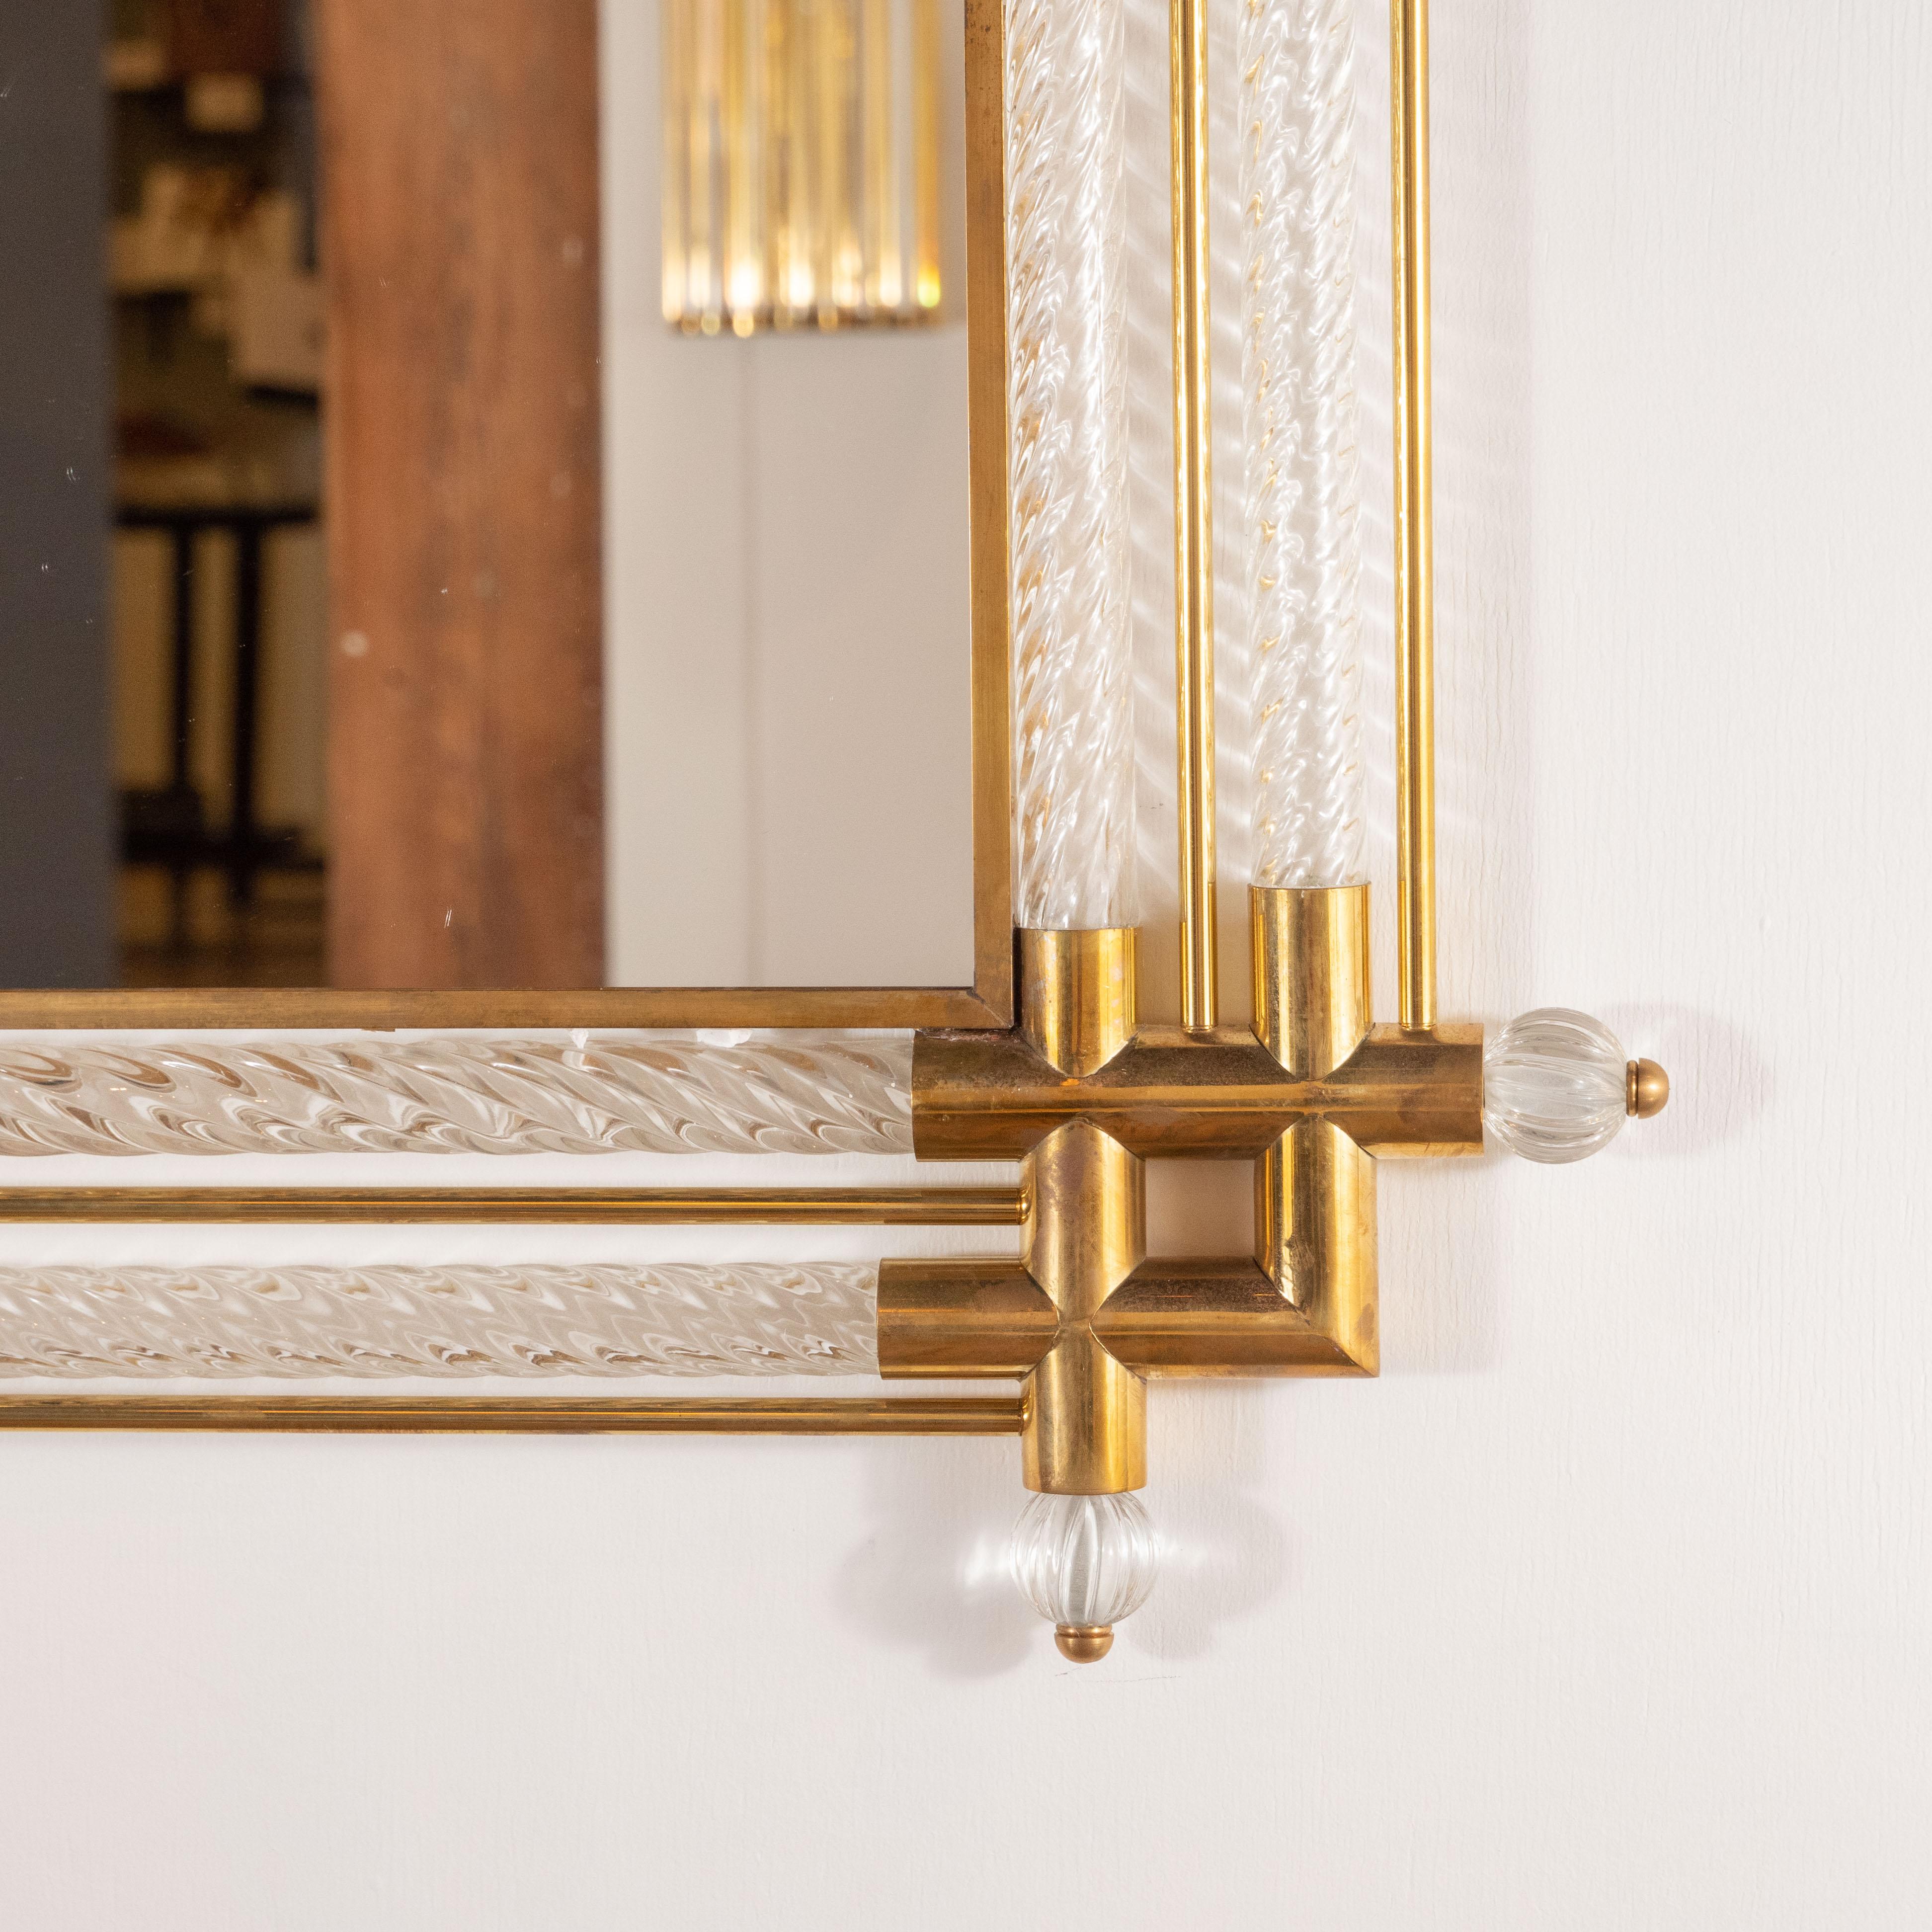 This pair of rectangular clear Murano glass mirrors with brass detailing was handmade in Venice, Italy and is reminiscent of Venini works. Made of clear Murano glass, hand blown with a twisted effect for texture and depth. Linear brass rods and